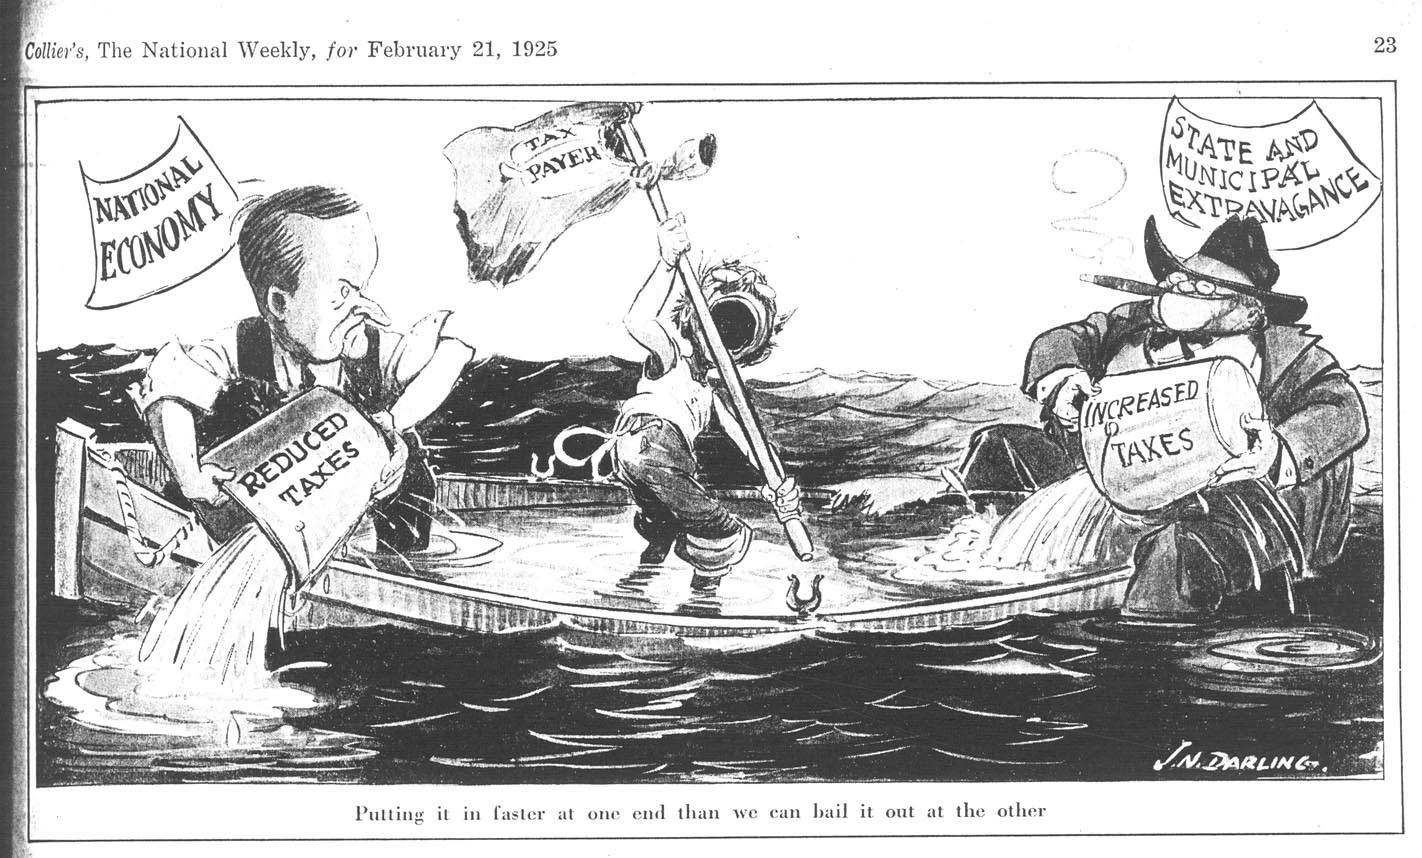 Cartoon by "Ding" Darling, "Putting it in faster at one end than we can bail it our at the other," The Des Moines Register, February 21, 1925. Courtesy of the University of Iowa. 